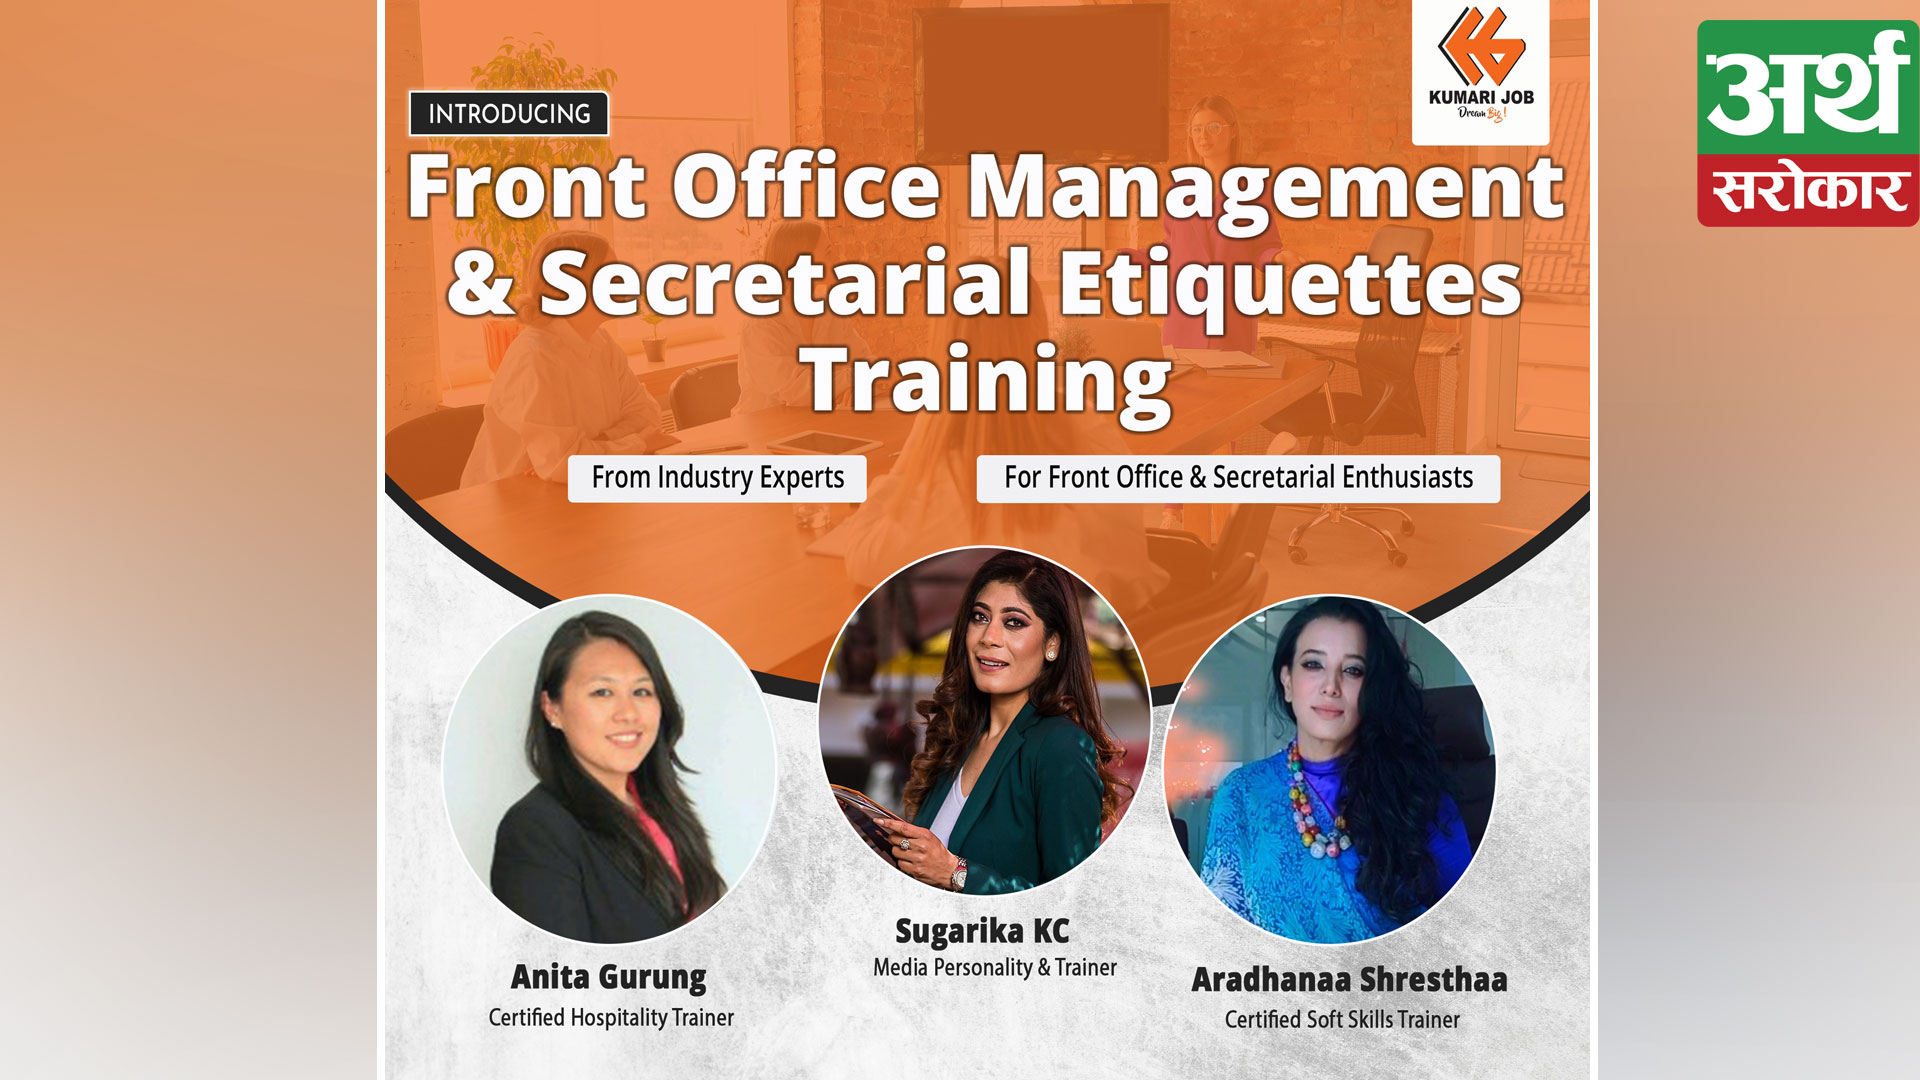 Front Office Management and Secretarial Etiquettes Training by Kumari Job